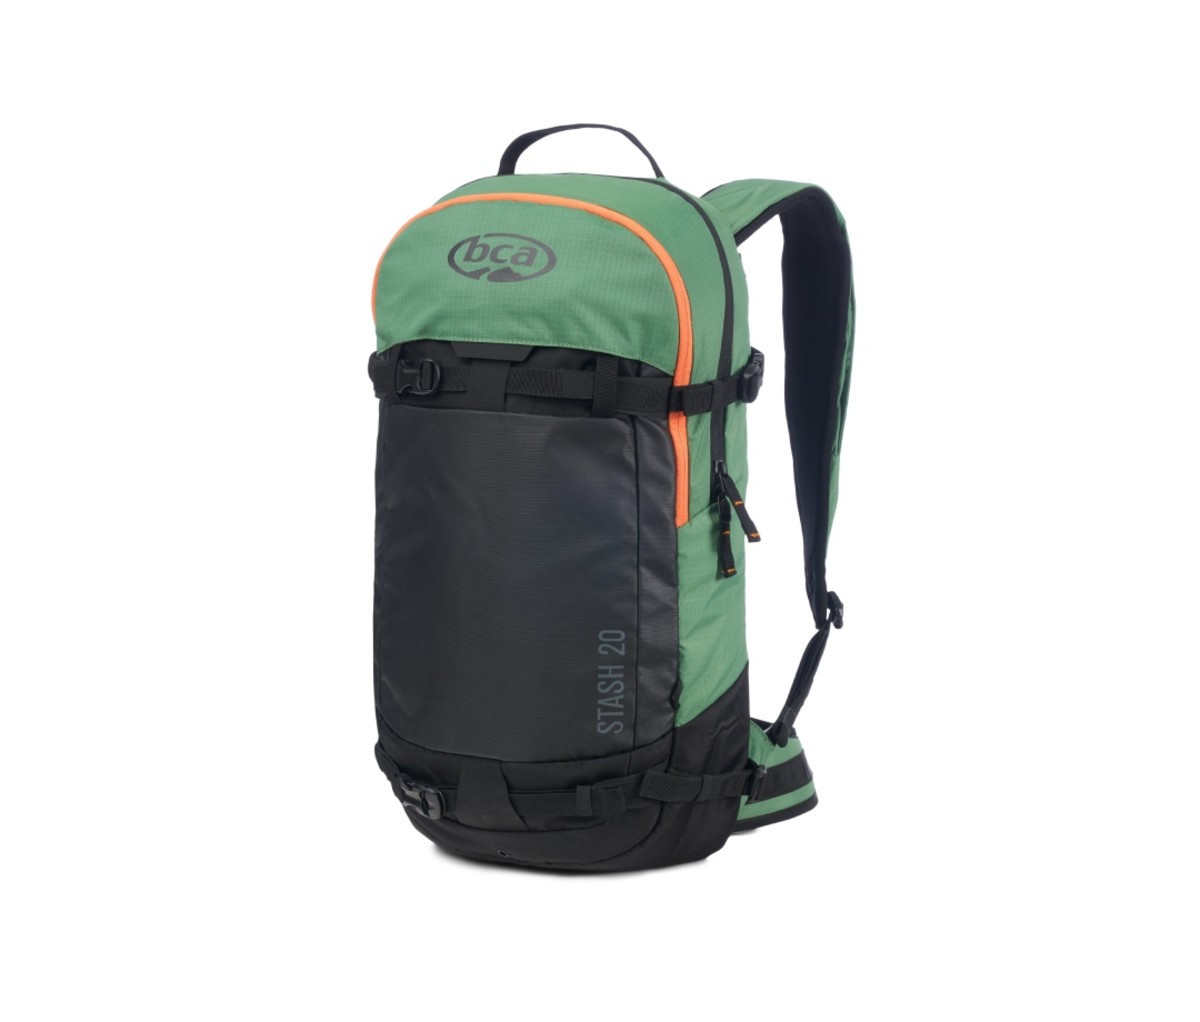 Green and black backpack with orange piping